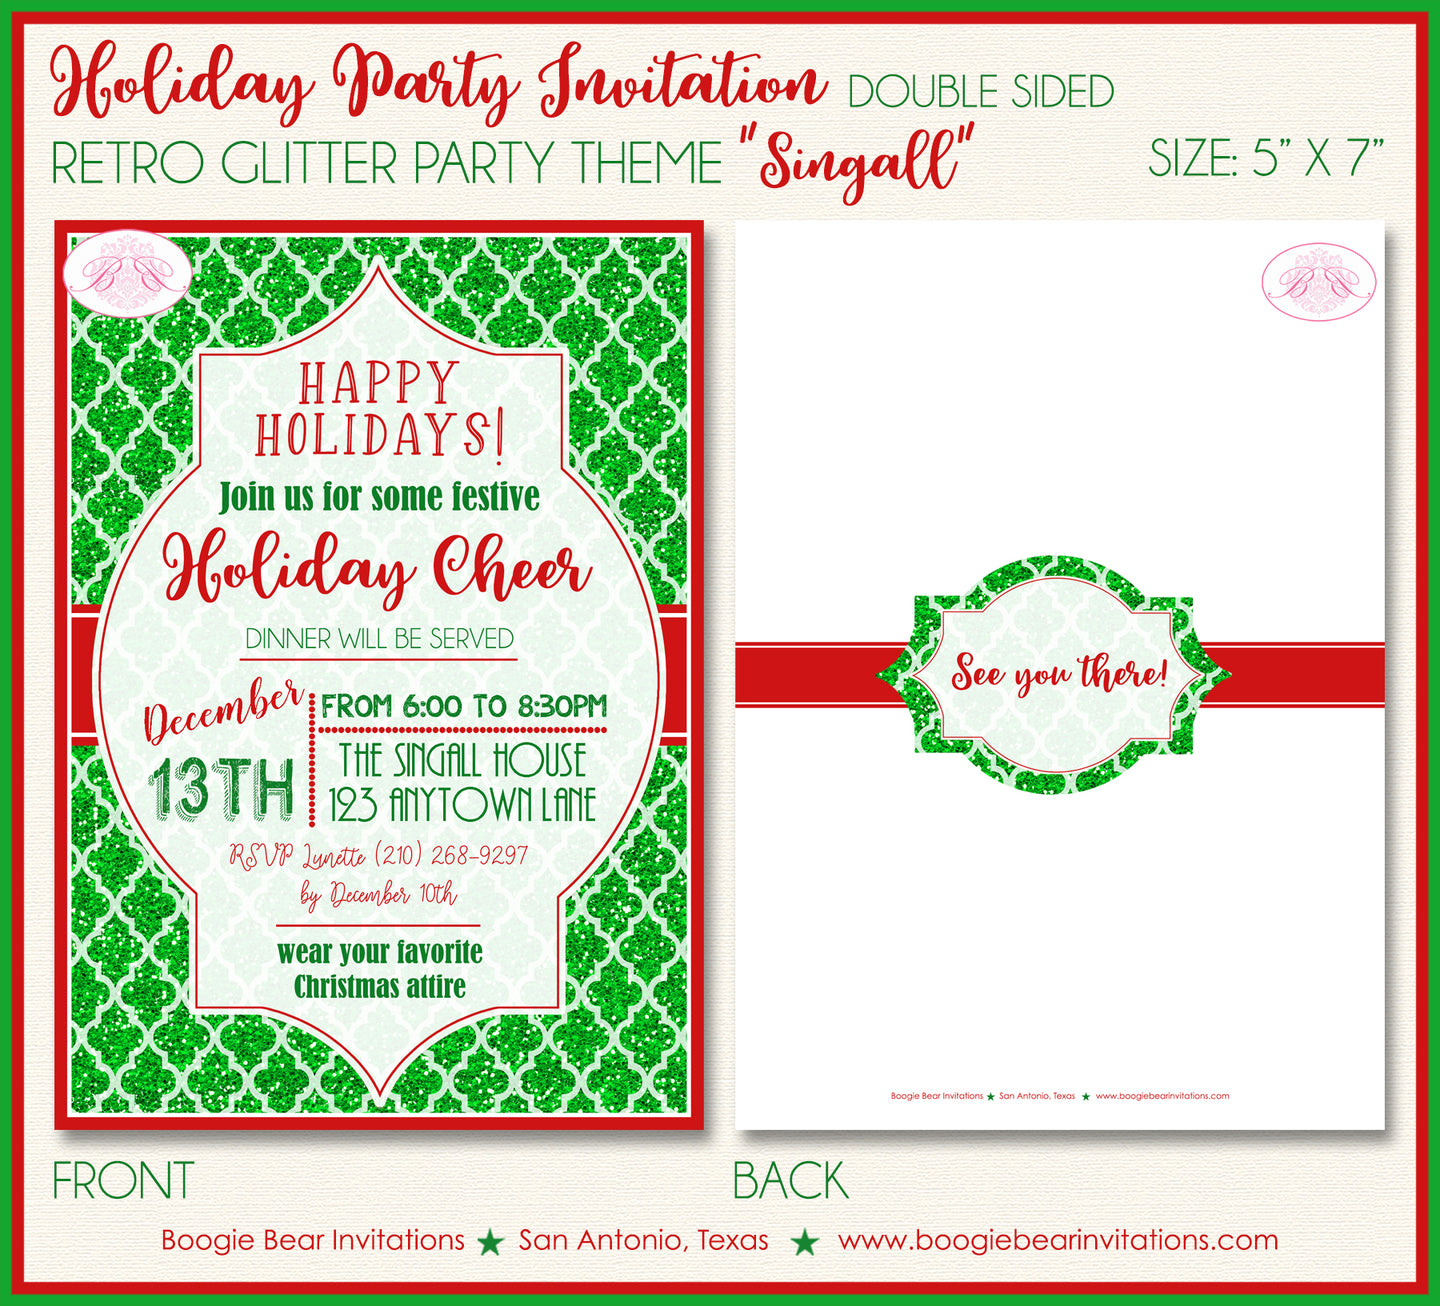 Retro Holiday Christmas Party Invitation Glitter Red Green Cheer Winter Boogie Bear Invitations Singall Theme Paperless Printable Printed